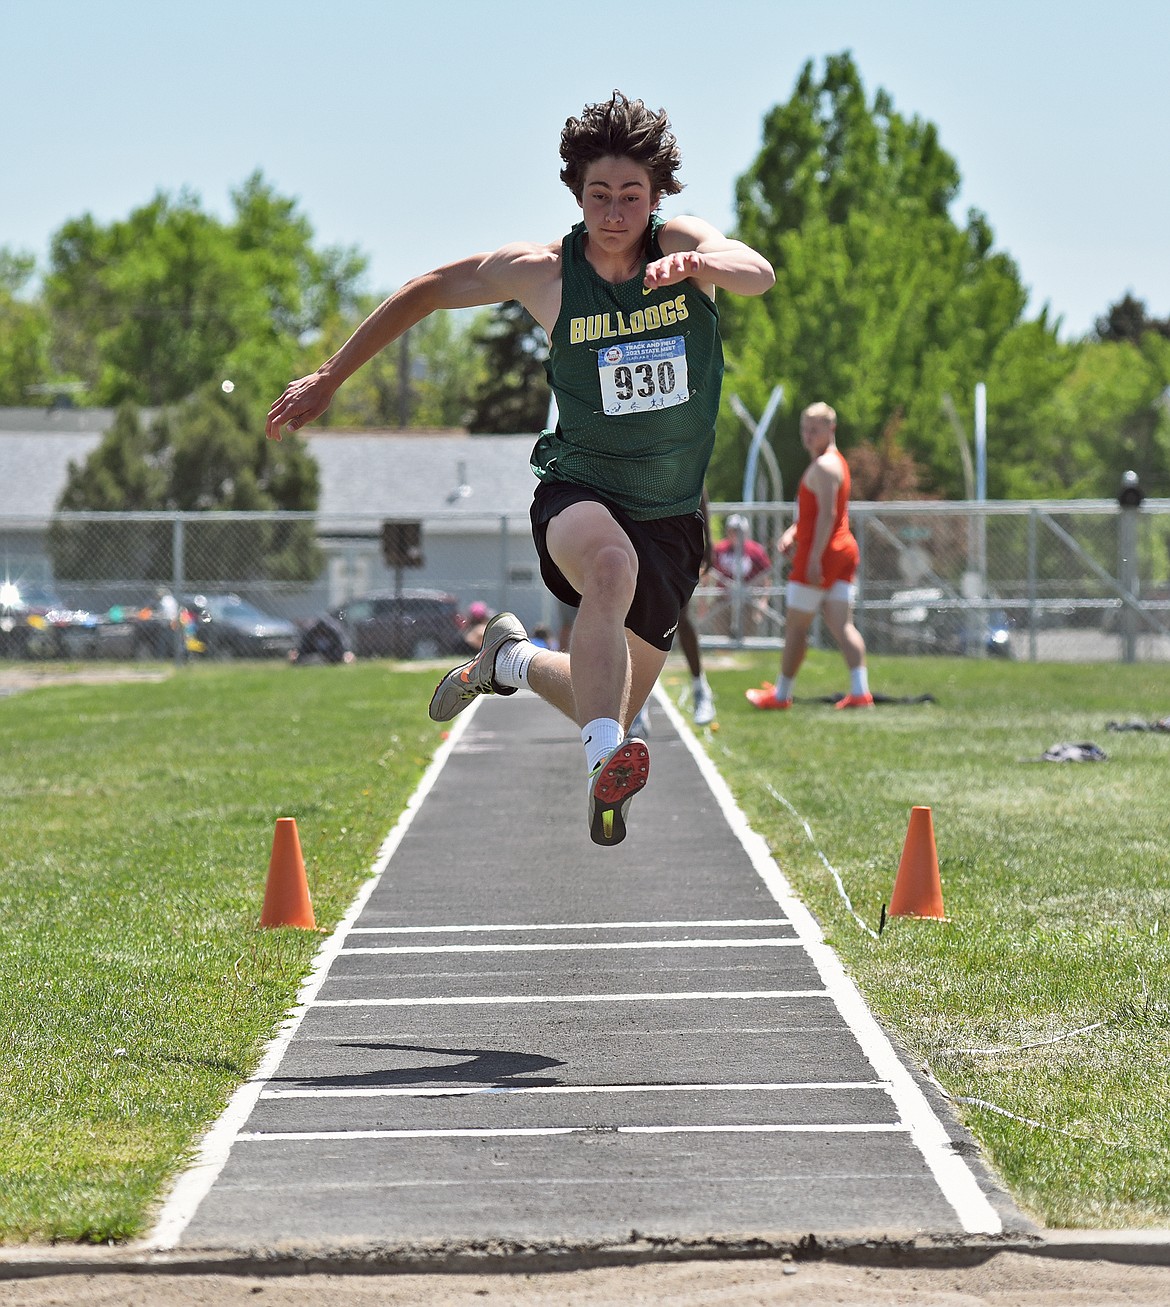 Bulldog Gabe Menicke flies in the Class A boys triple jump final to take the state title in the event at the Montana Class A-B State Track and Field Meet in Laurel on Saturday. (Whitney England/Whitefish Pilot)